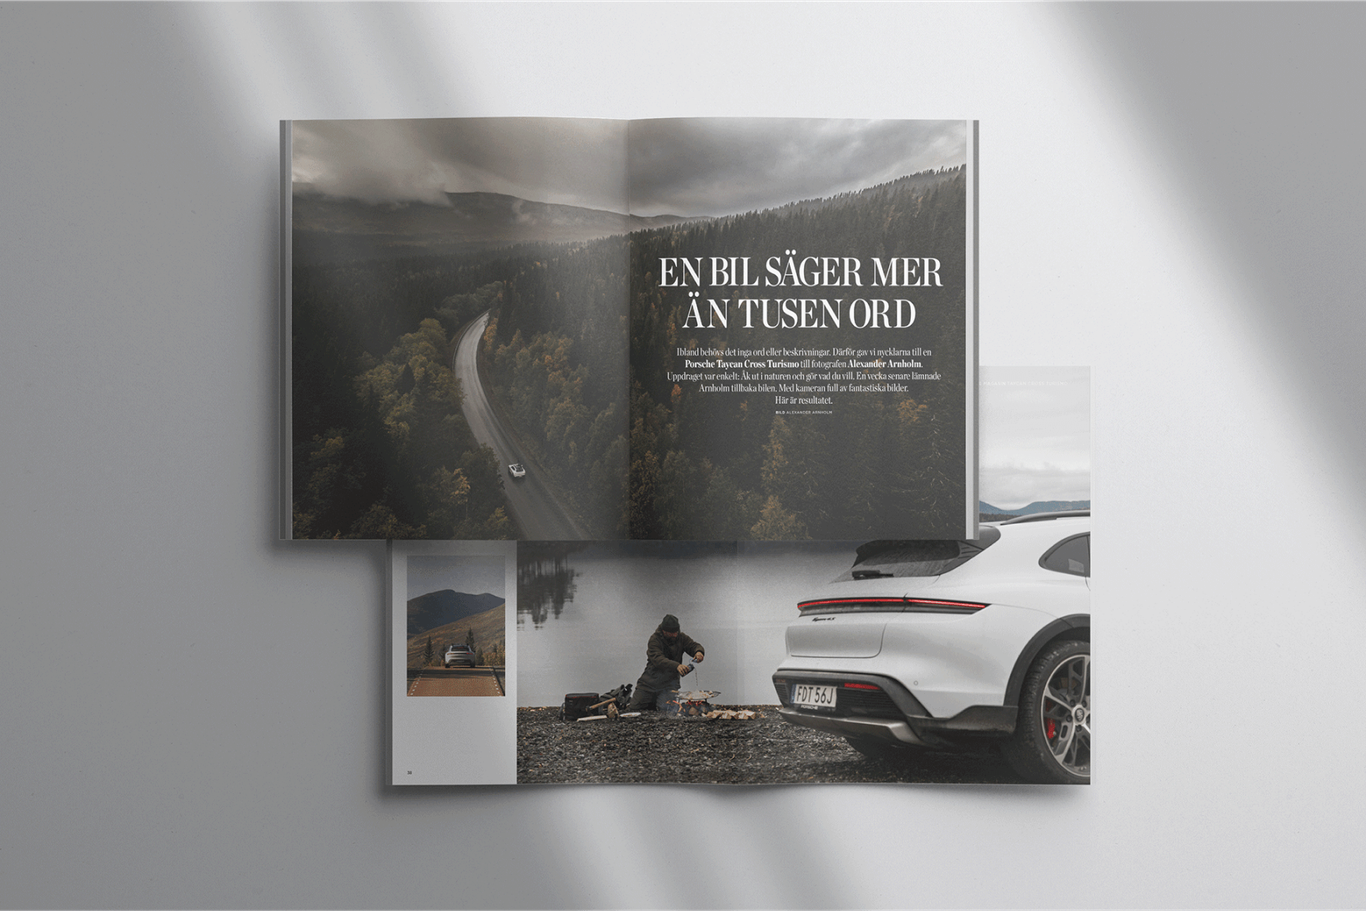 A magazine with a picture of a car on it.